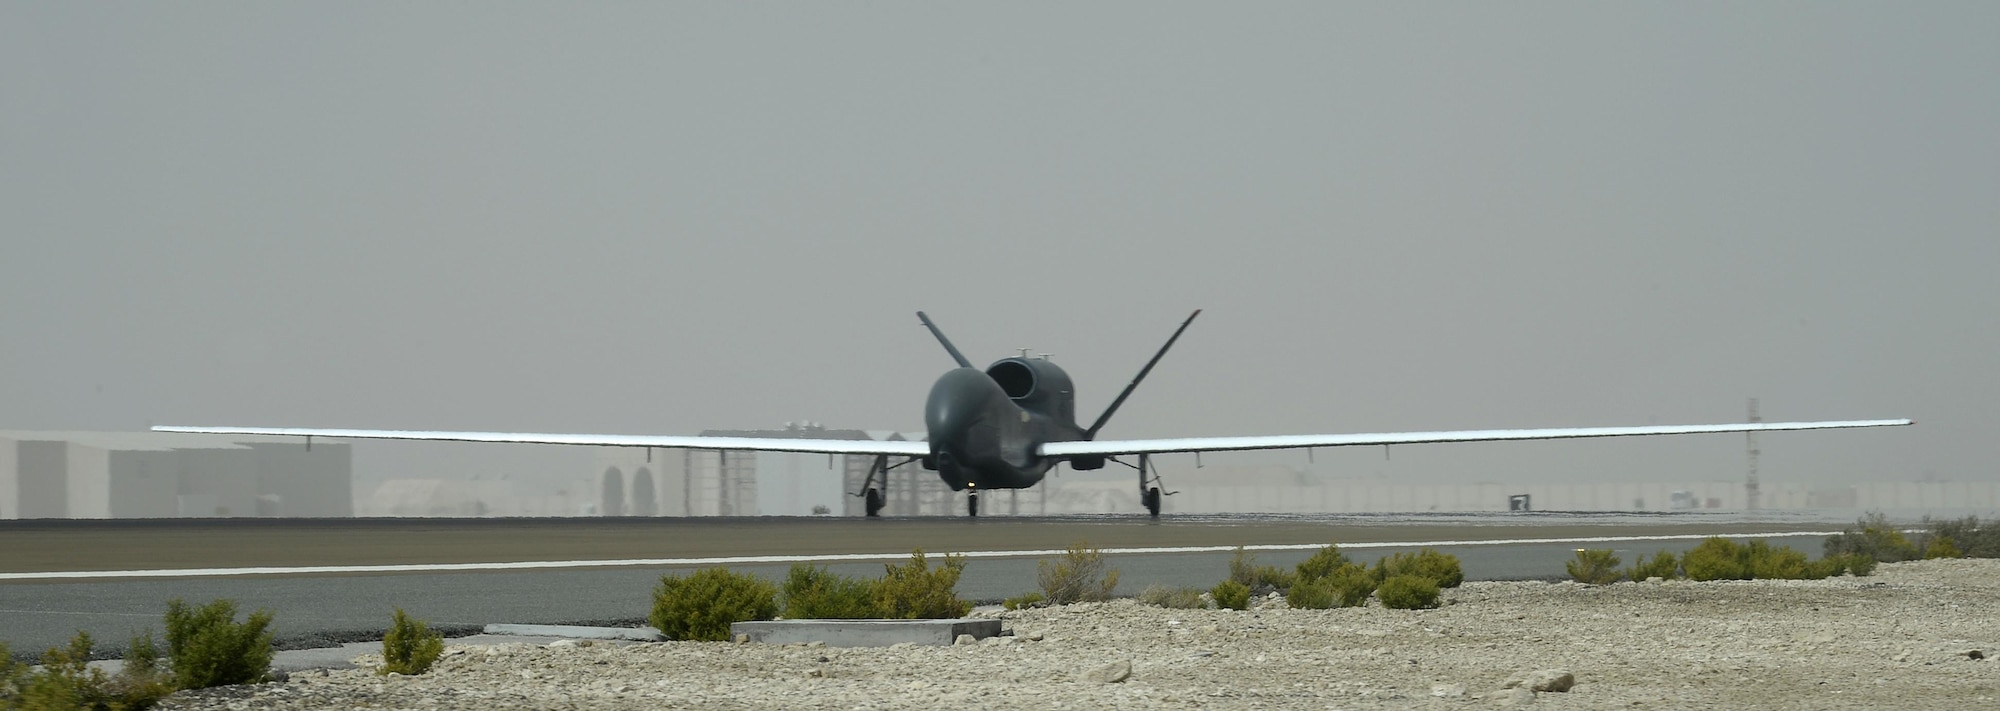 RQ-4 Global Hawk aircraft 2019 lands at an undisclosed location in Southwest Asia Mar. 8, 2015. A2019 flew a 30.5 hour mission in support of Operation Inherent Resolve, surpassing the 10,000 flying hour milestone. A2019 also holds the record for the longest block 20 flight, which lasted 31.5 hours. (U.S. Air Force photo/Tech. Sgt. Marie Brown)